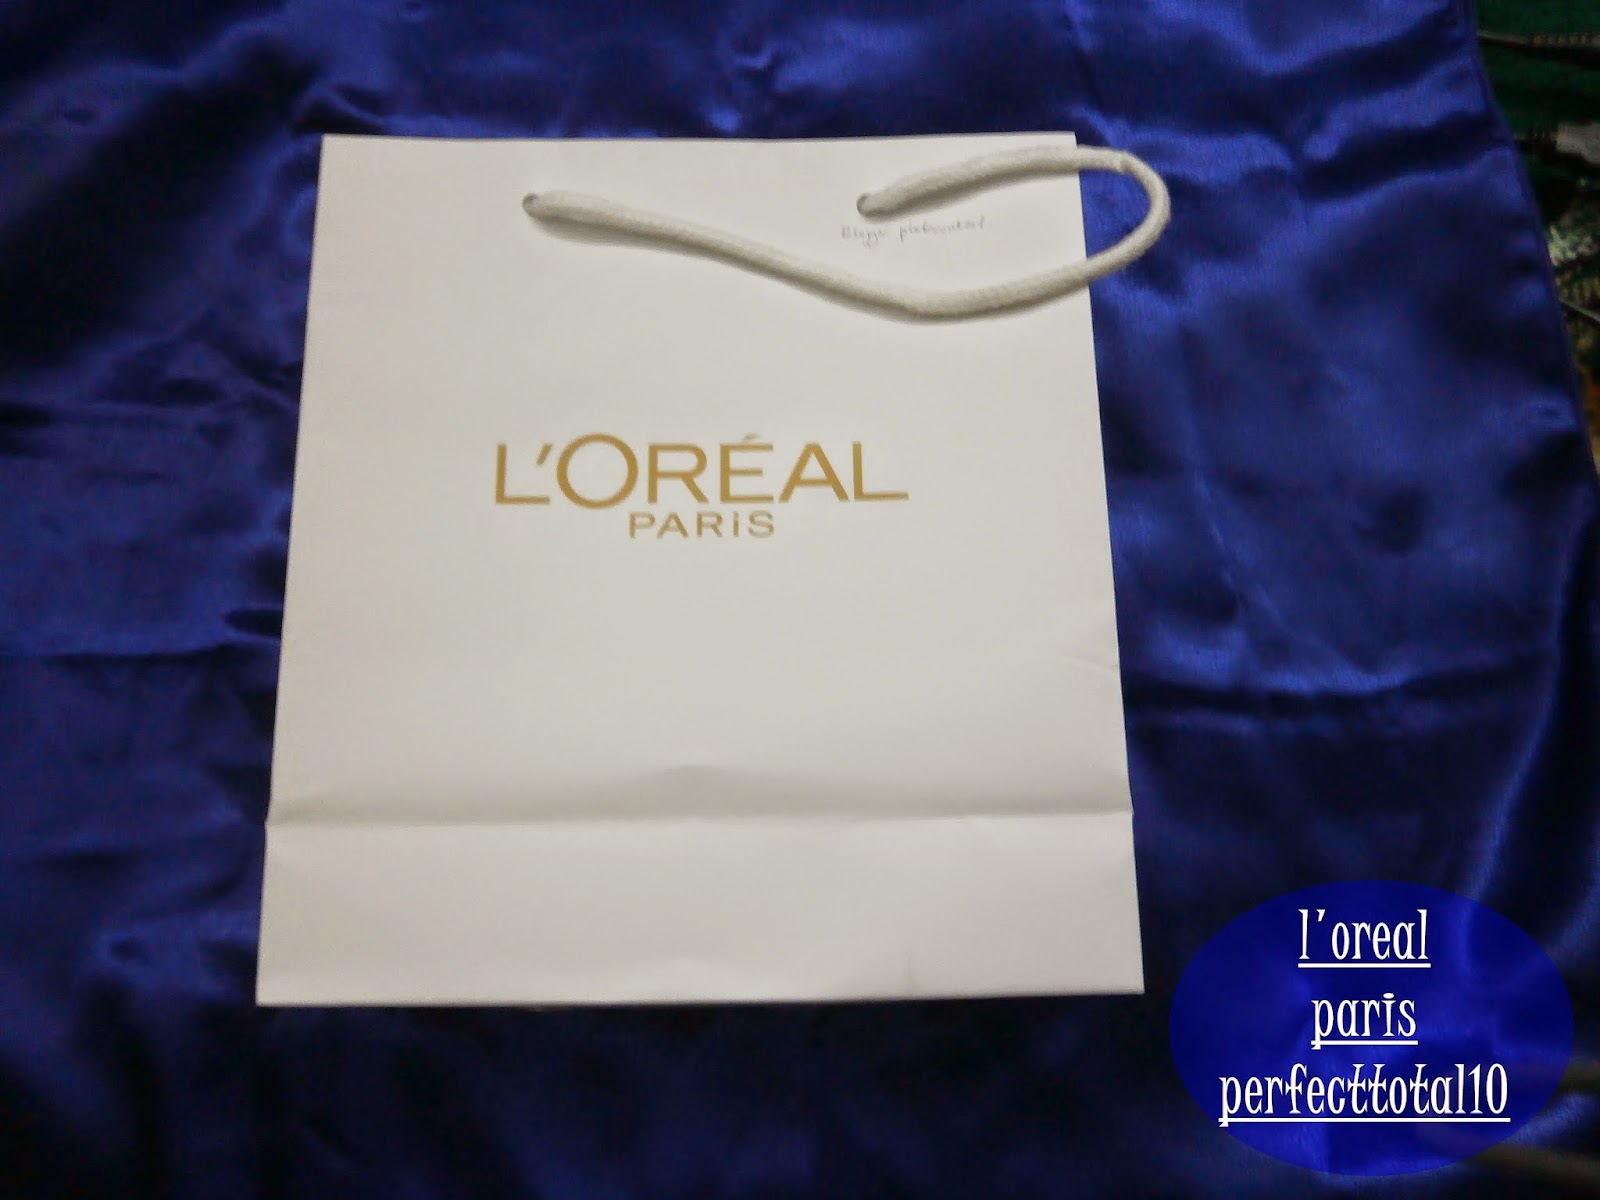 Hannah Sytieh : Event Loreal White Perfect Total 10 yg 